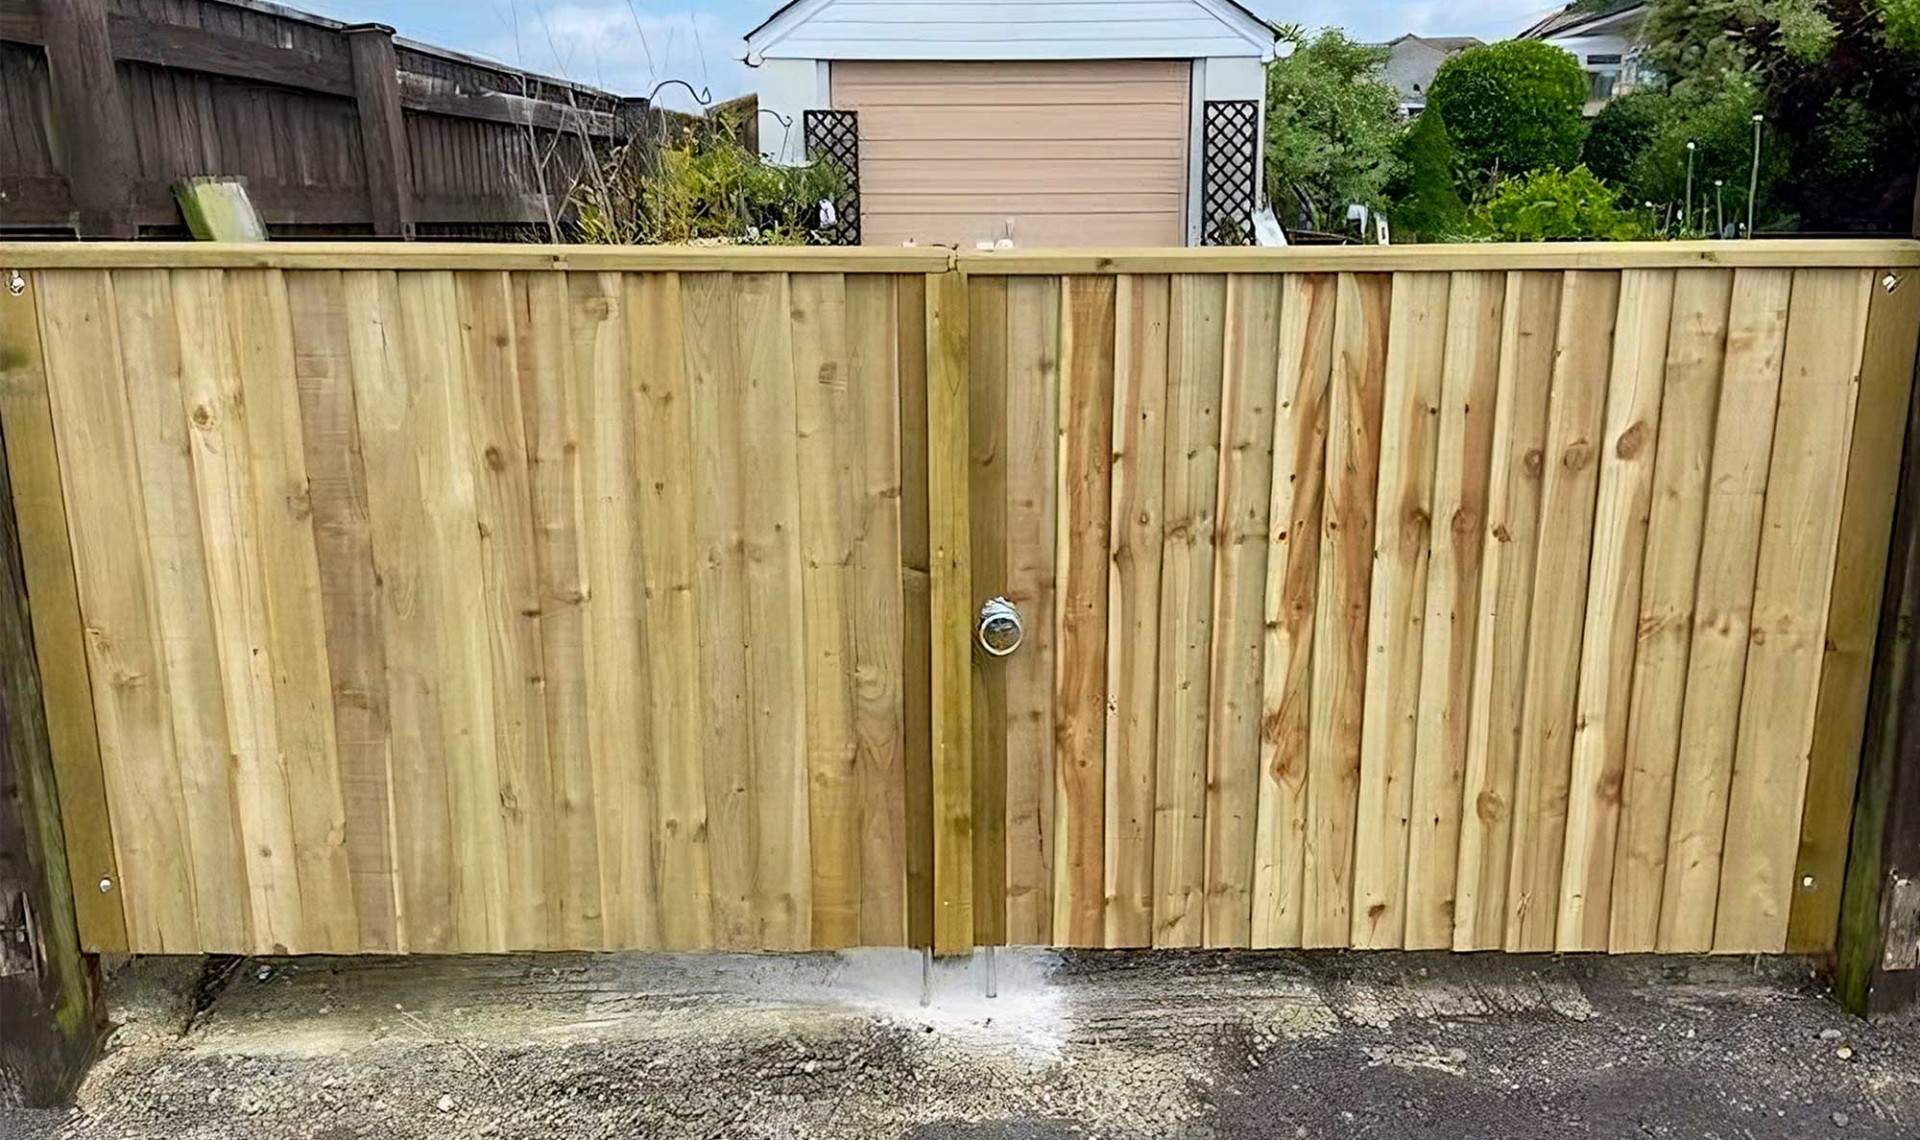 Pair of large closeboard gates made out of wood with a silver rounded handle.